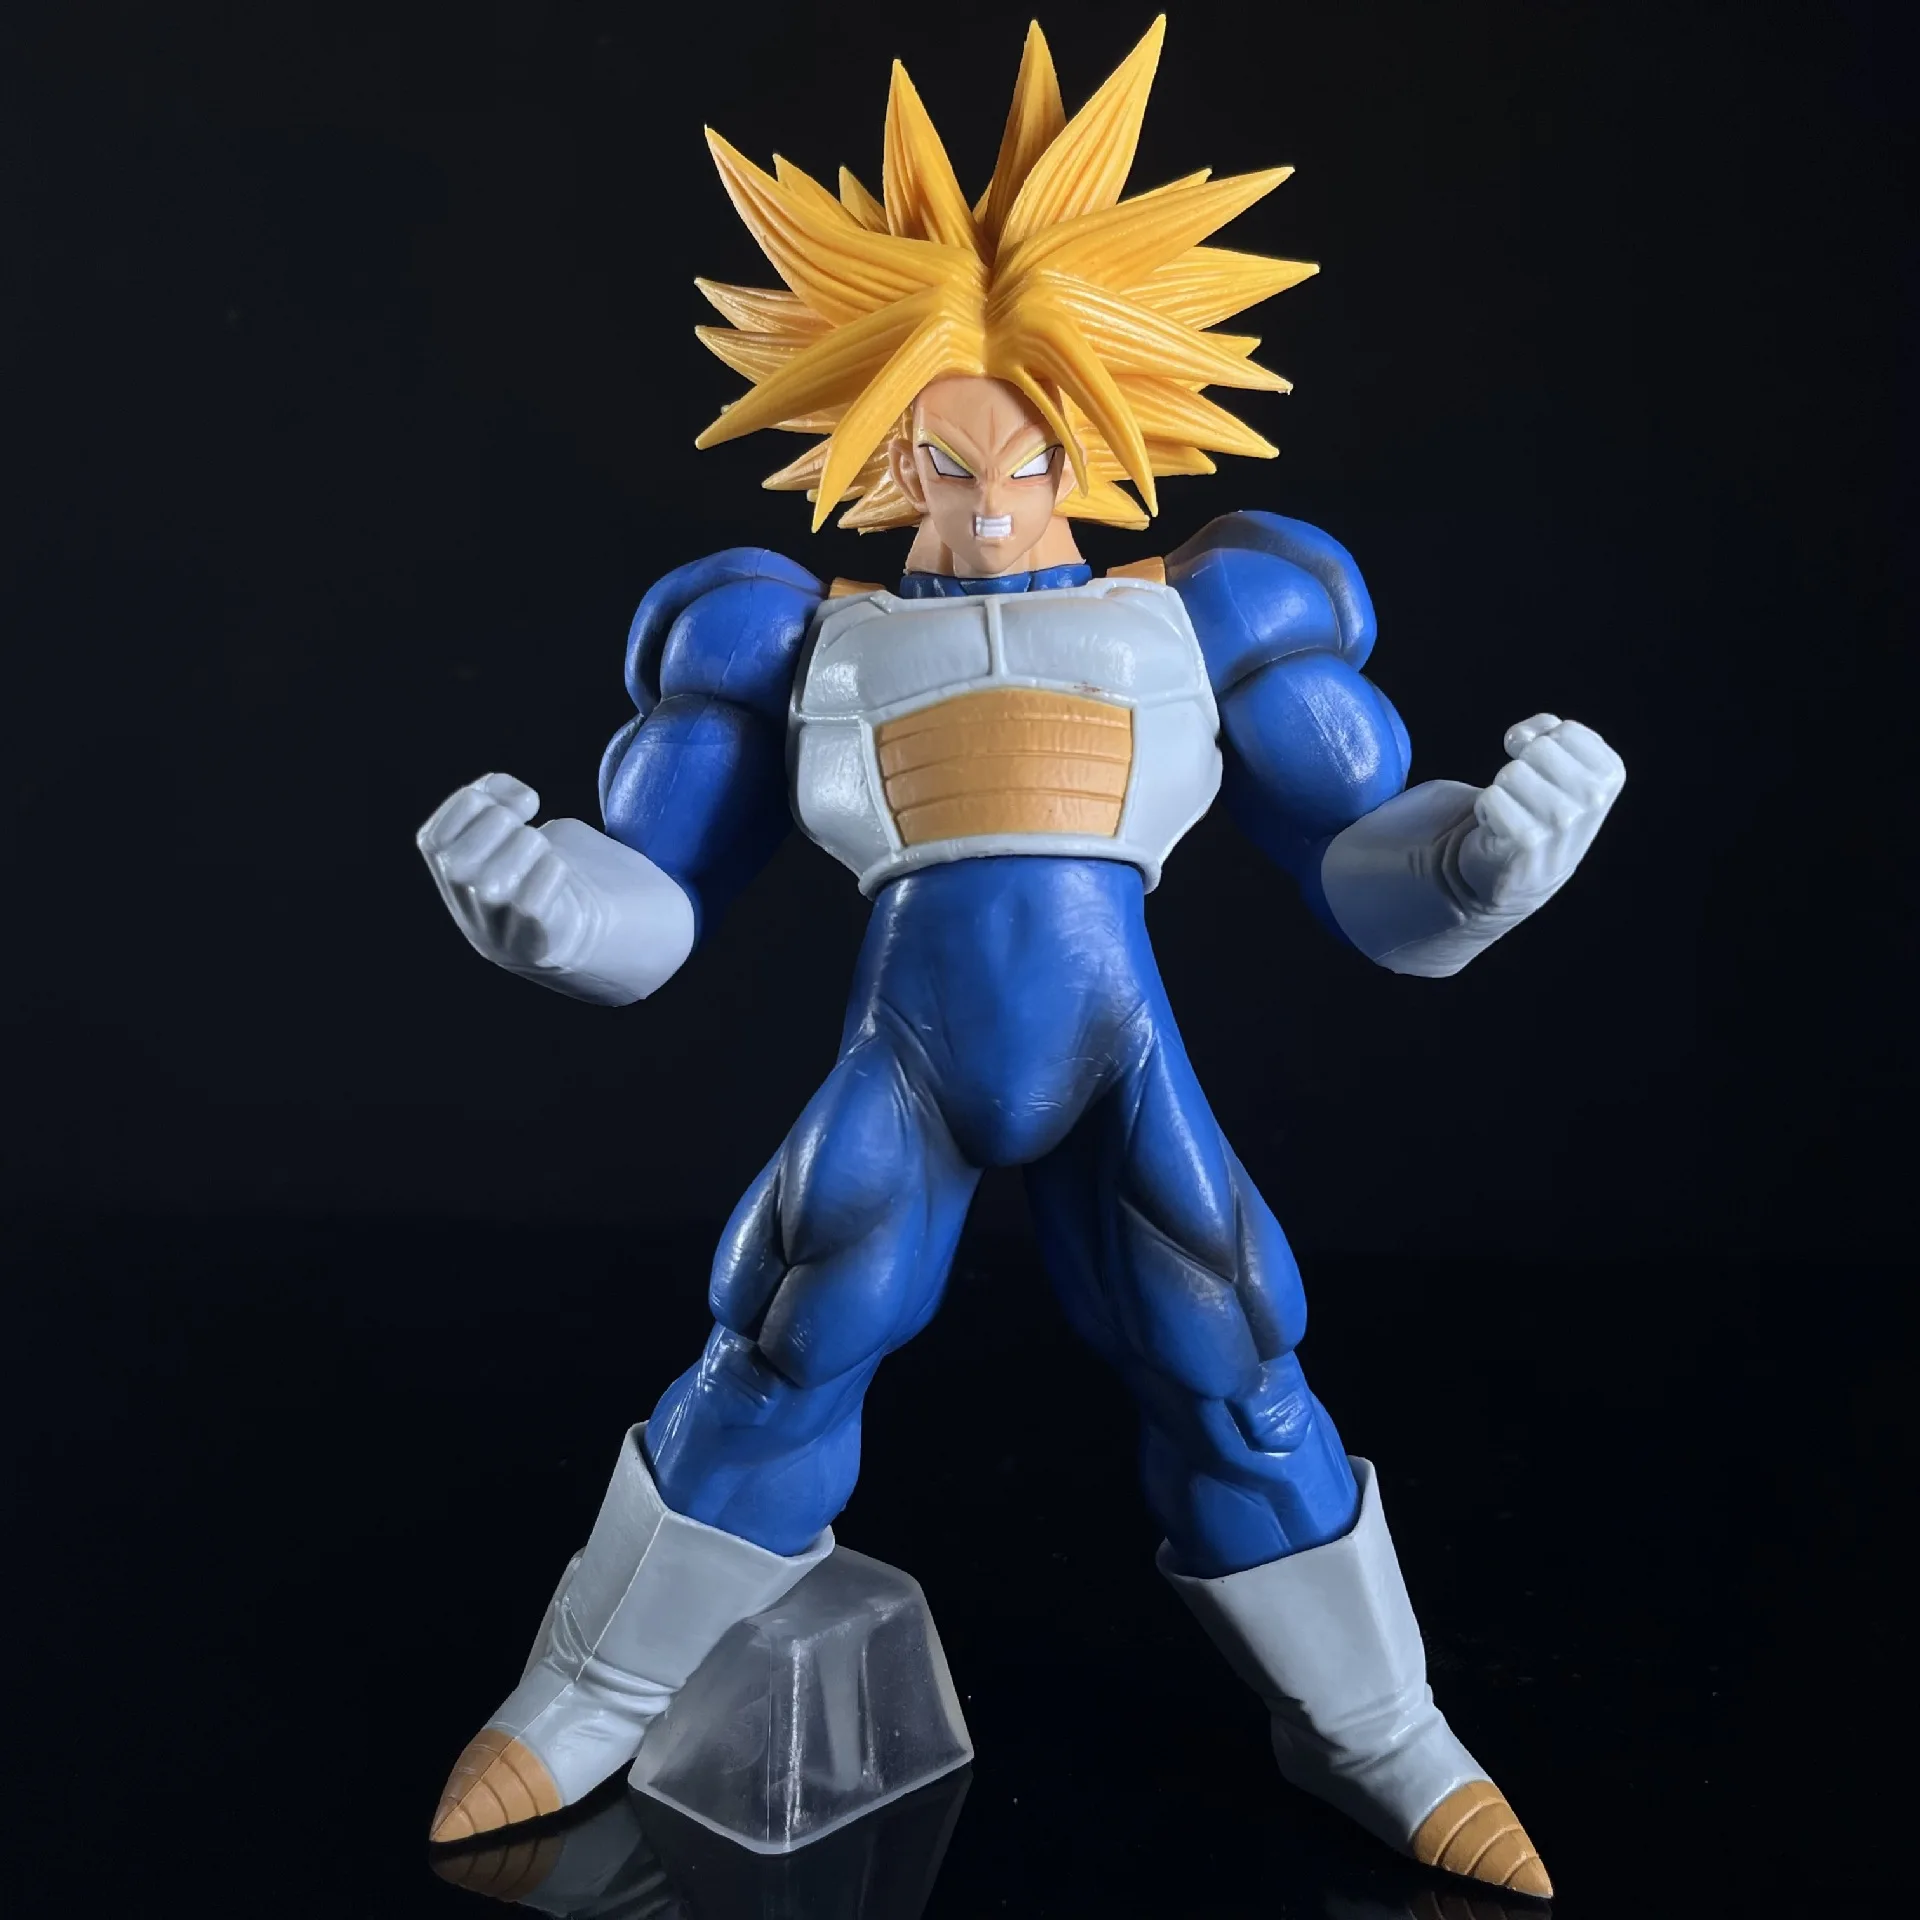 44CM Anime Dragon Ball Z Characters Trunks Super Saiyan Mannequin Model Pvc  Action Toys Gk Statue Series Doll Collection Gift - AliExpress